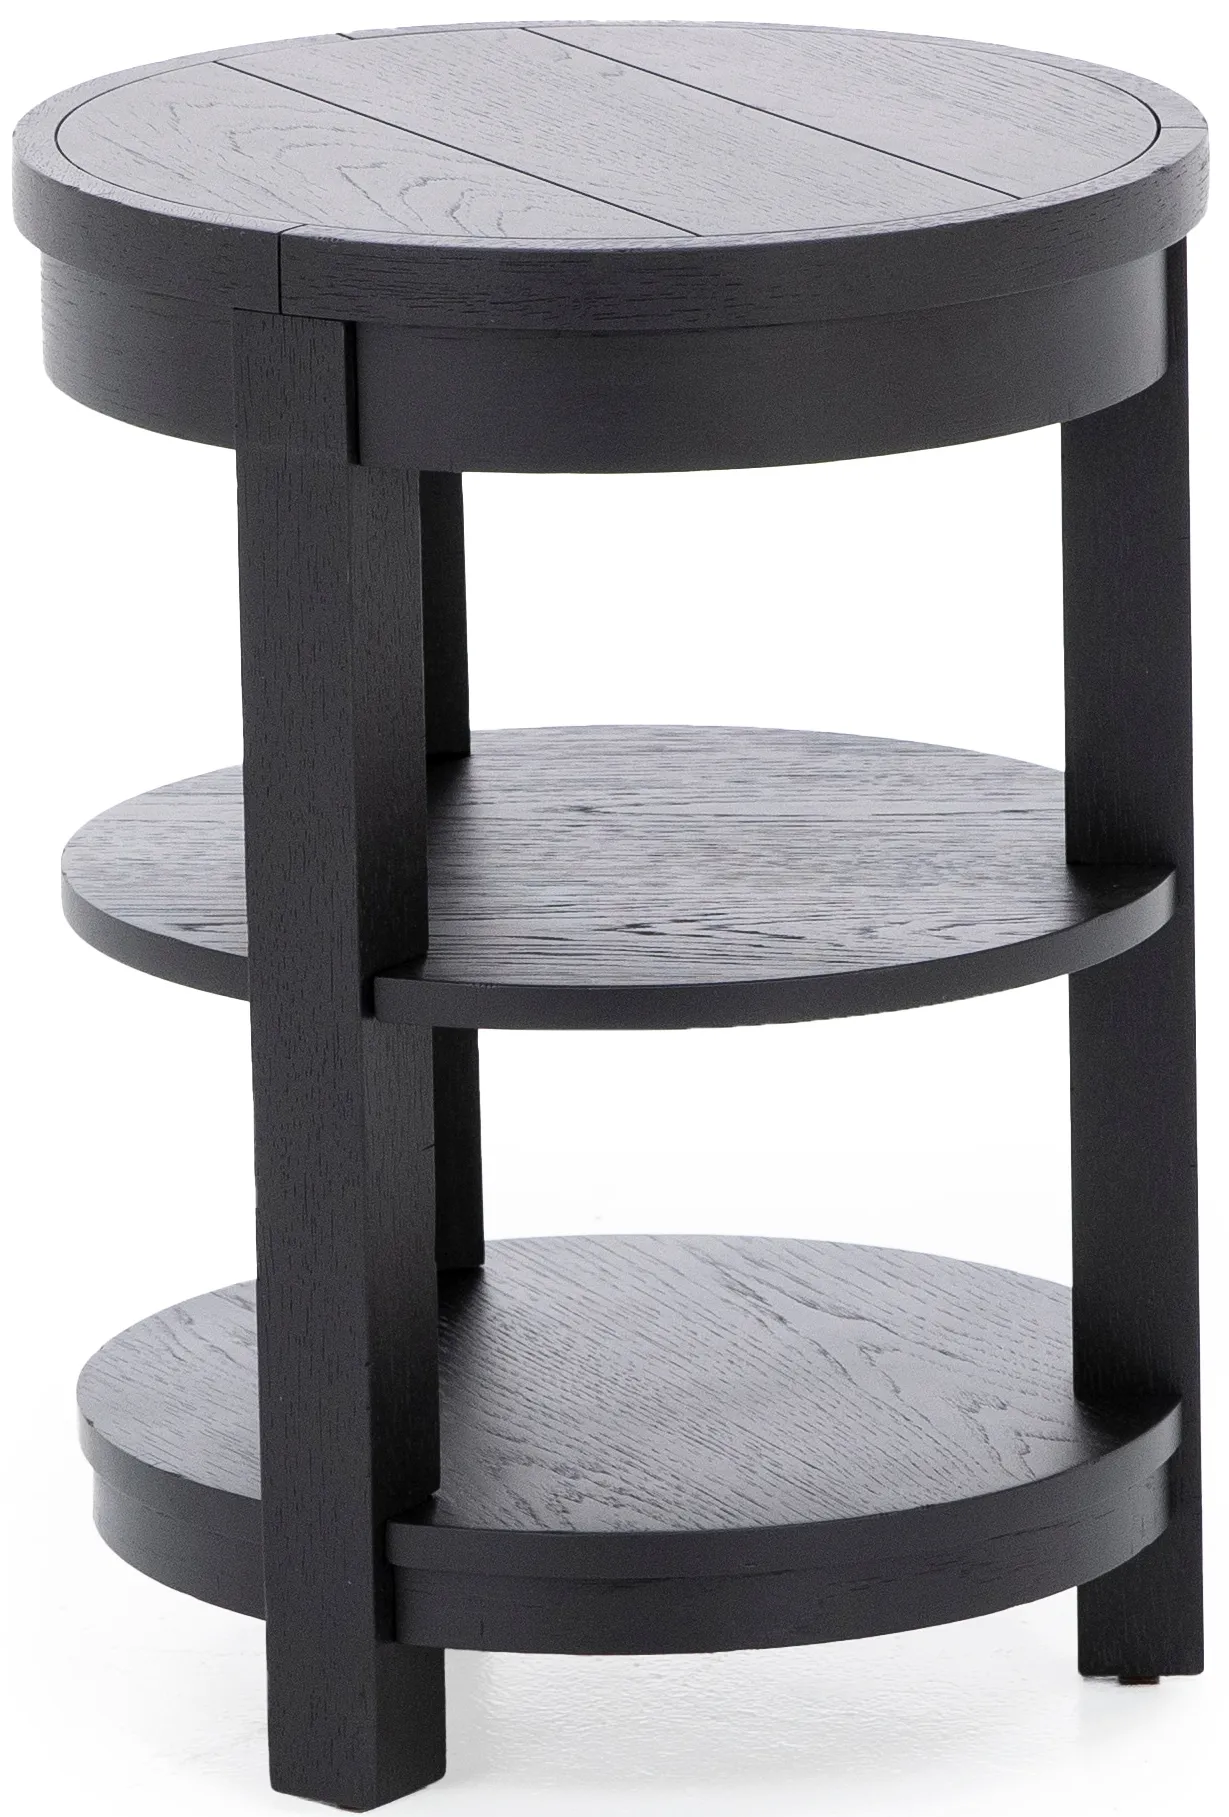 Traditions Blacksmith Round Chairside Table